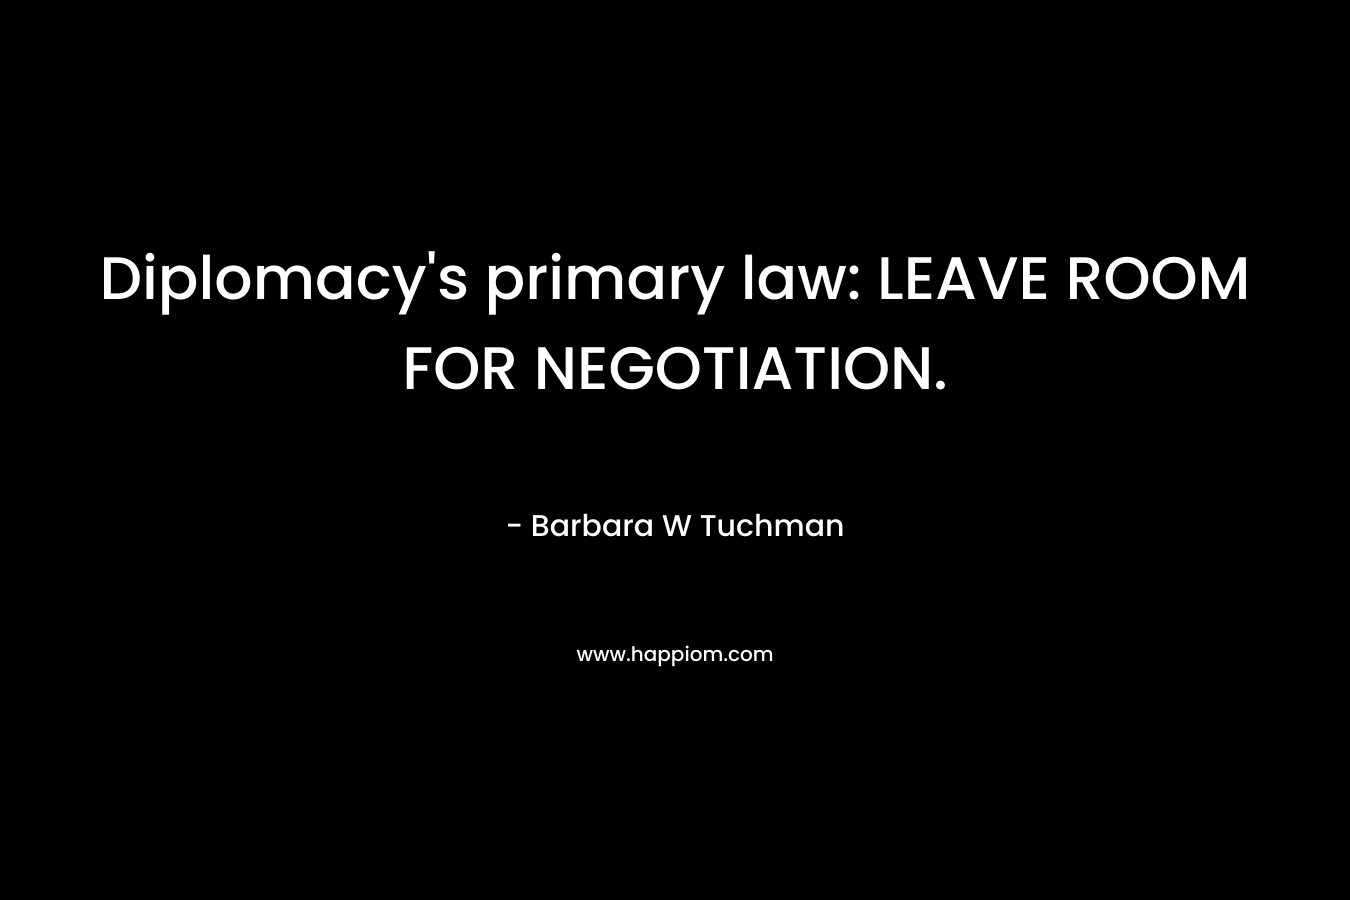 Diplomacy's primary law: LEAVE ROOM FOR NEGOTIATION.